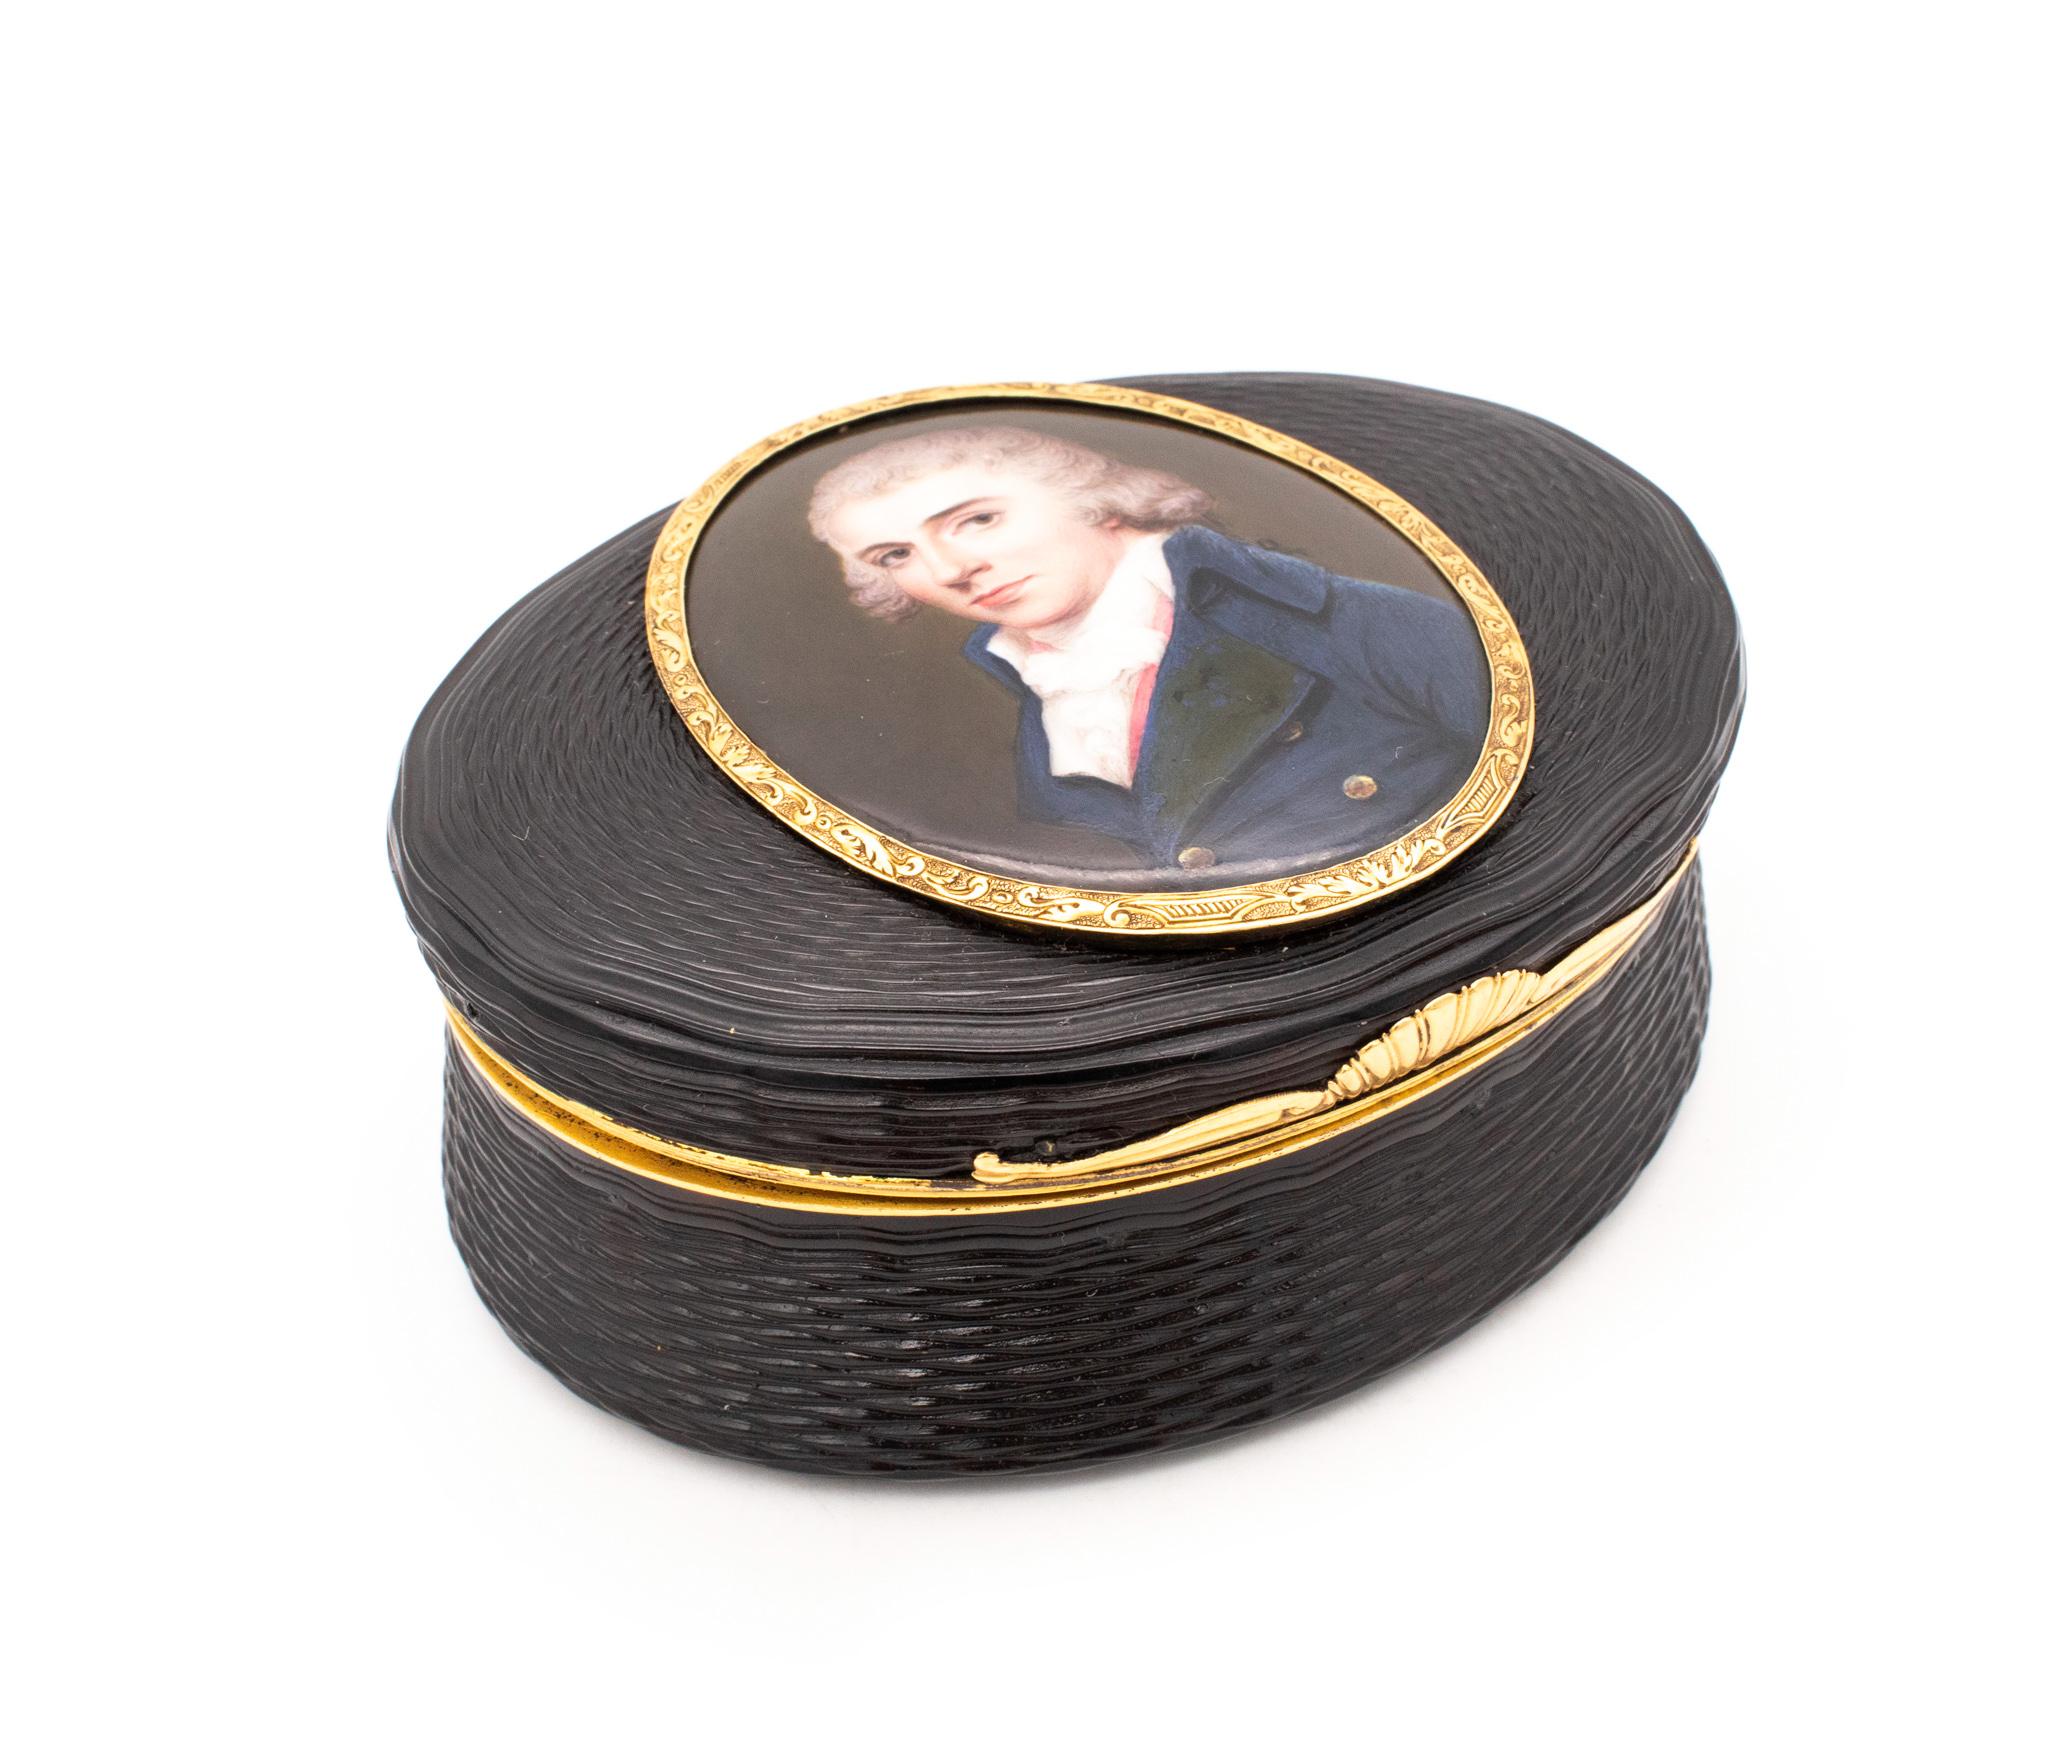 Presentation Snuff box from the 18th century French School.

A very important and rare Neoclassical oval box, made in Paris, France circa 1790. It was crafted with translucent natural brownish carvings mounted in a chiseled frame made up of yellow